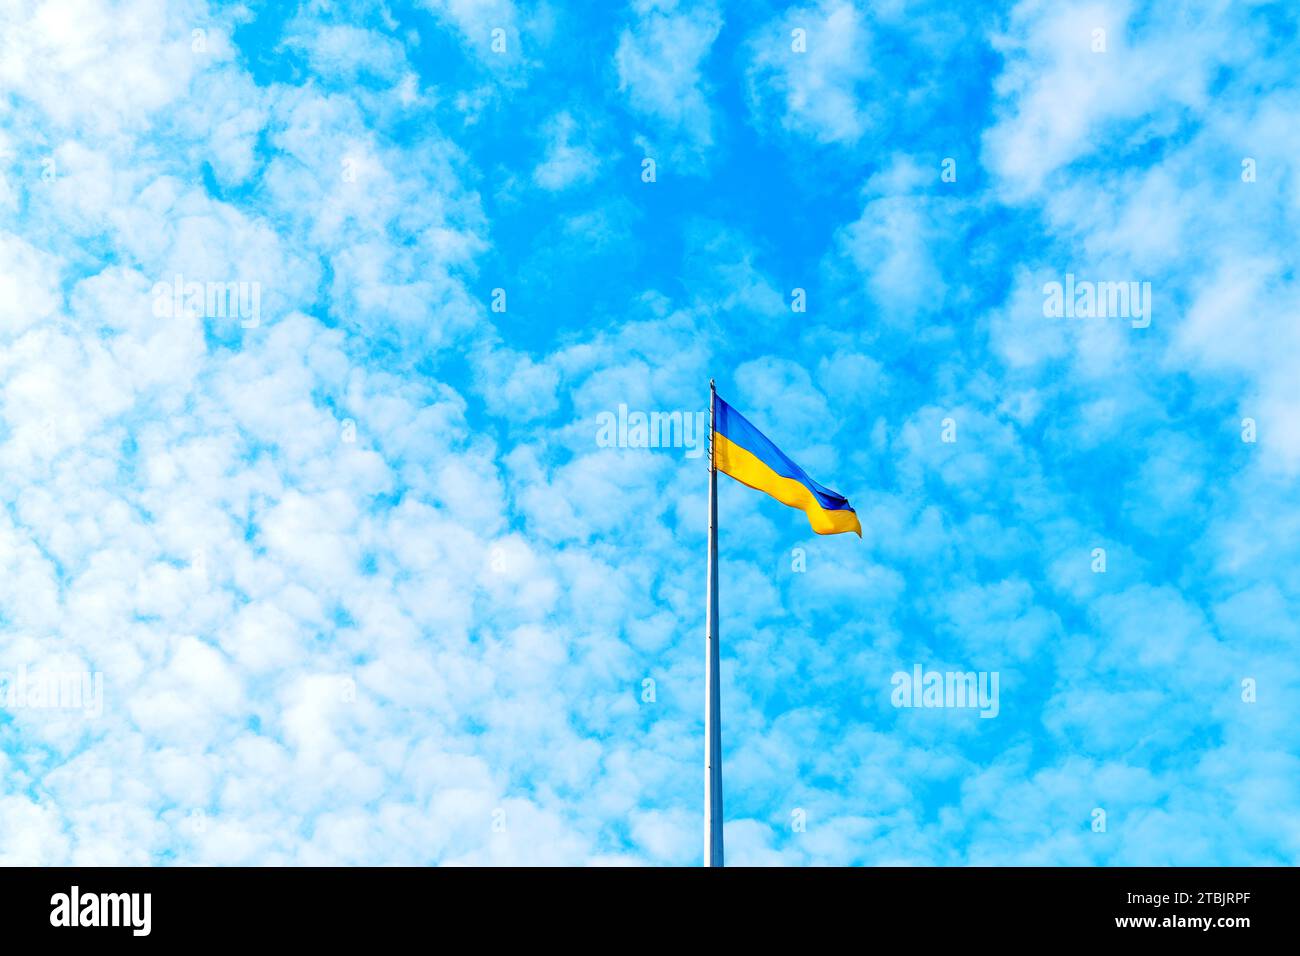 Ukrainian flag proudly fluttering on its pole against the backdrop of towering cumulus clouds in the deep blue sky. Stock Photo